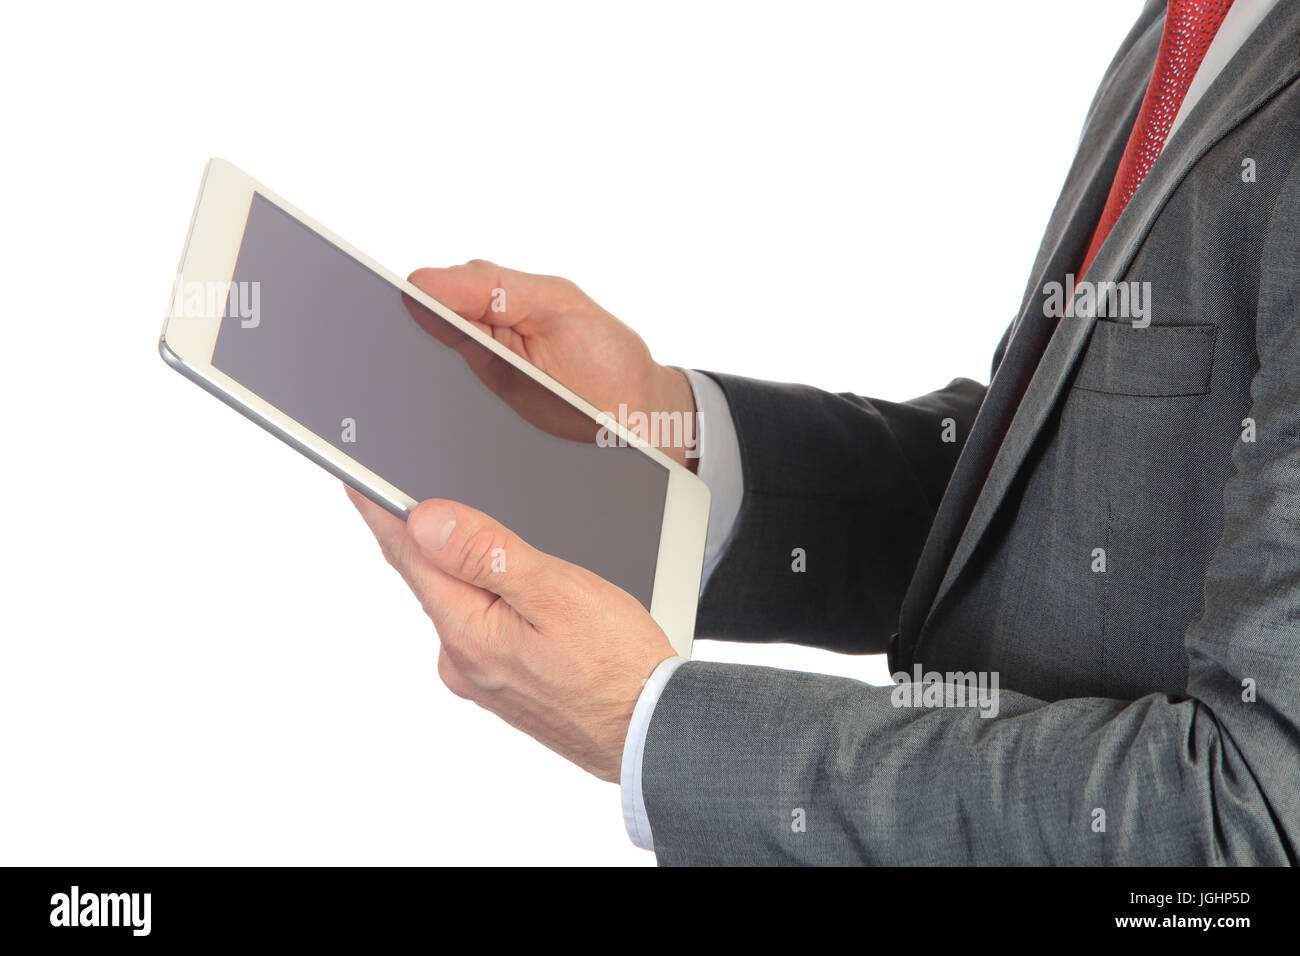 Businessman hold white tablet close-up. Man in gray suit use new tablet isolated on white background. Stock Photo